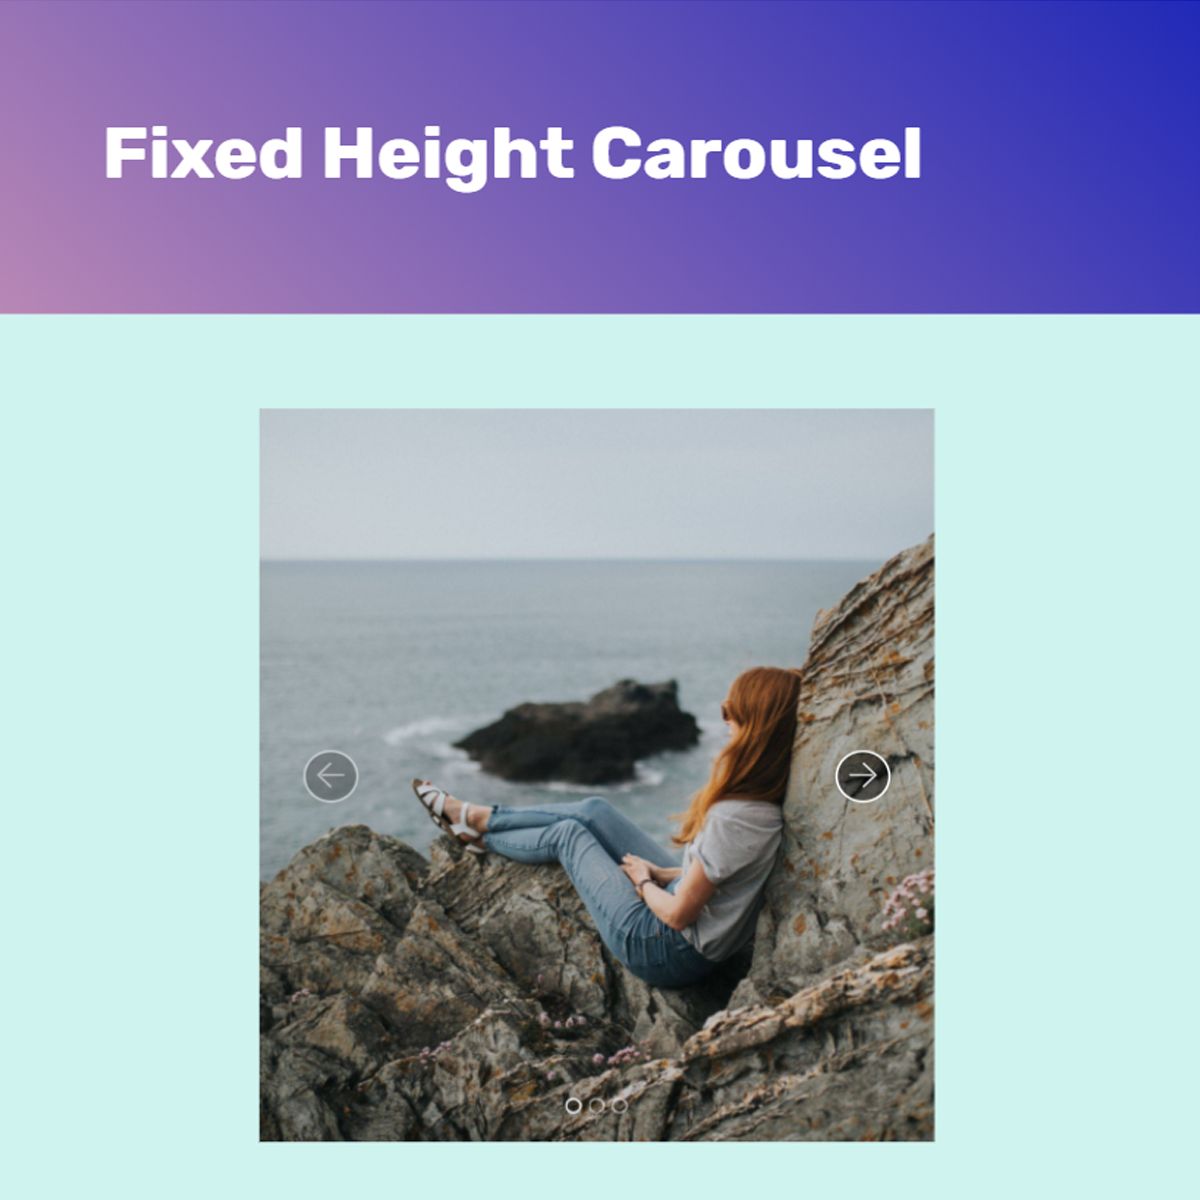 CSS Bootstrap Image Carousel